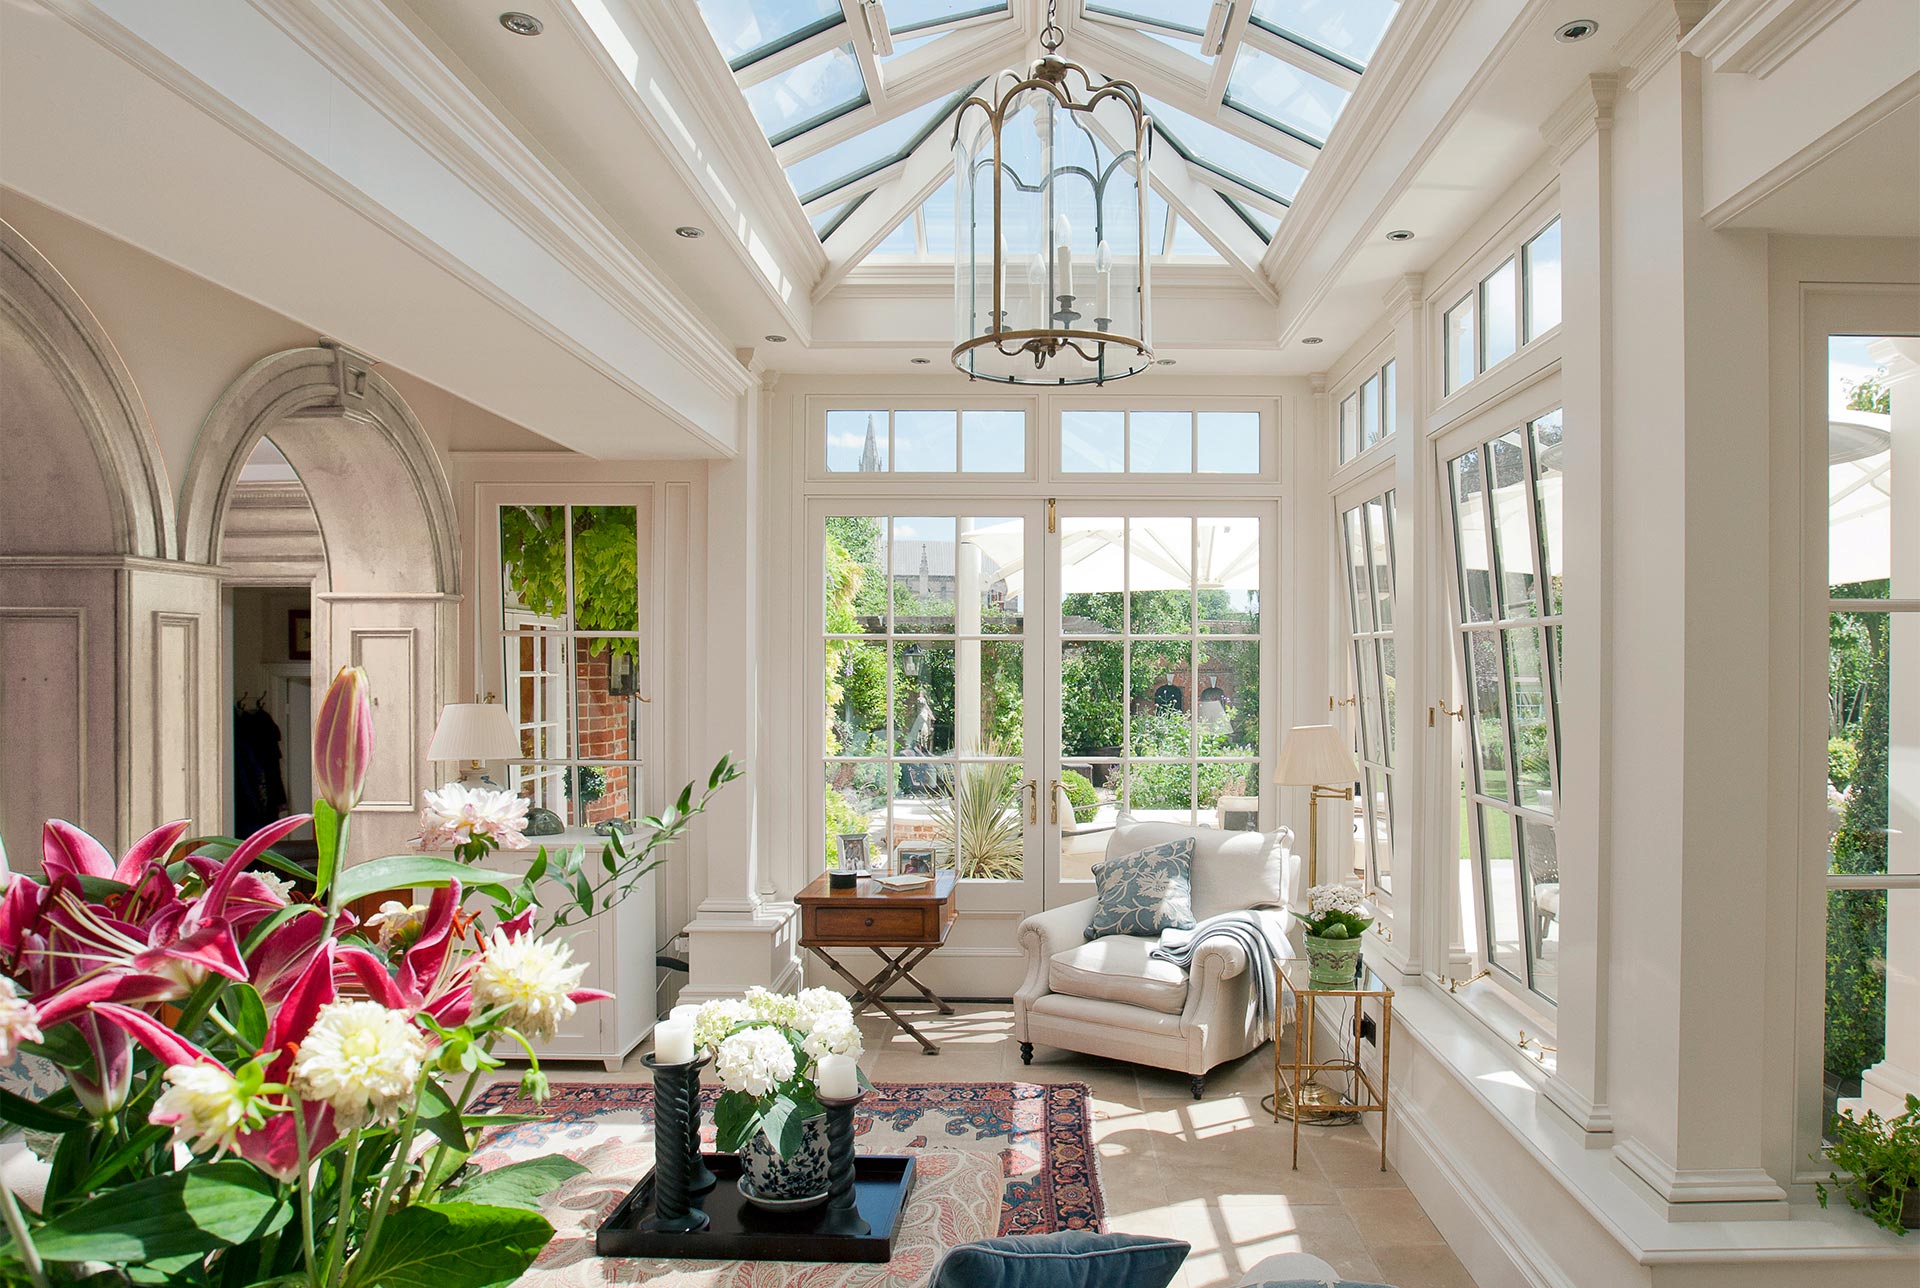 Interior view of this orangery used as a multi room space.